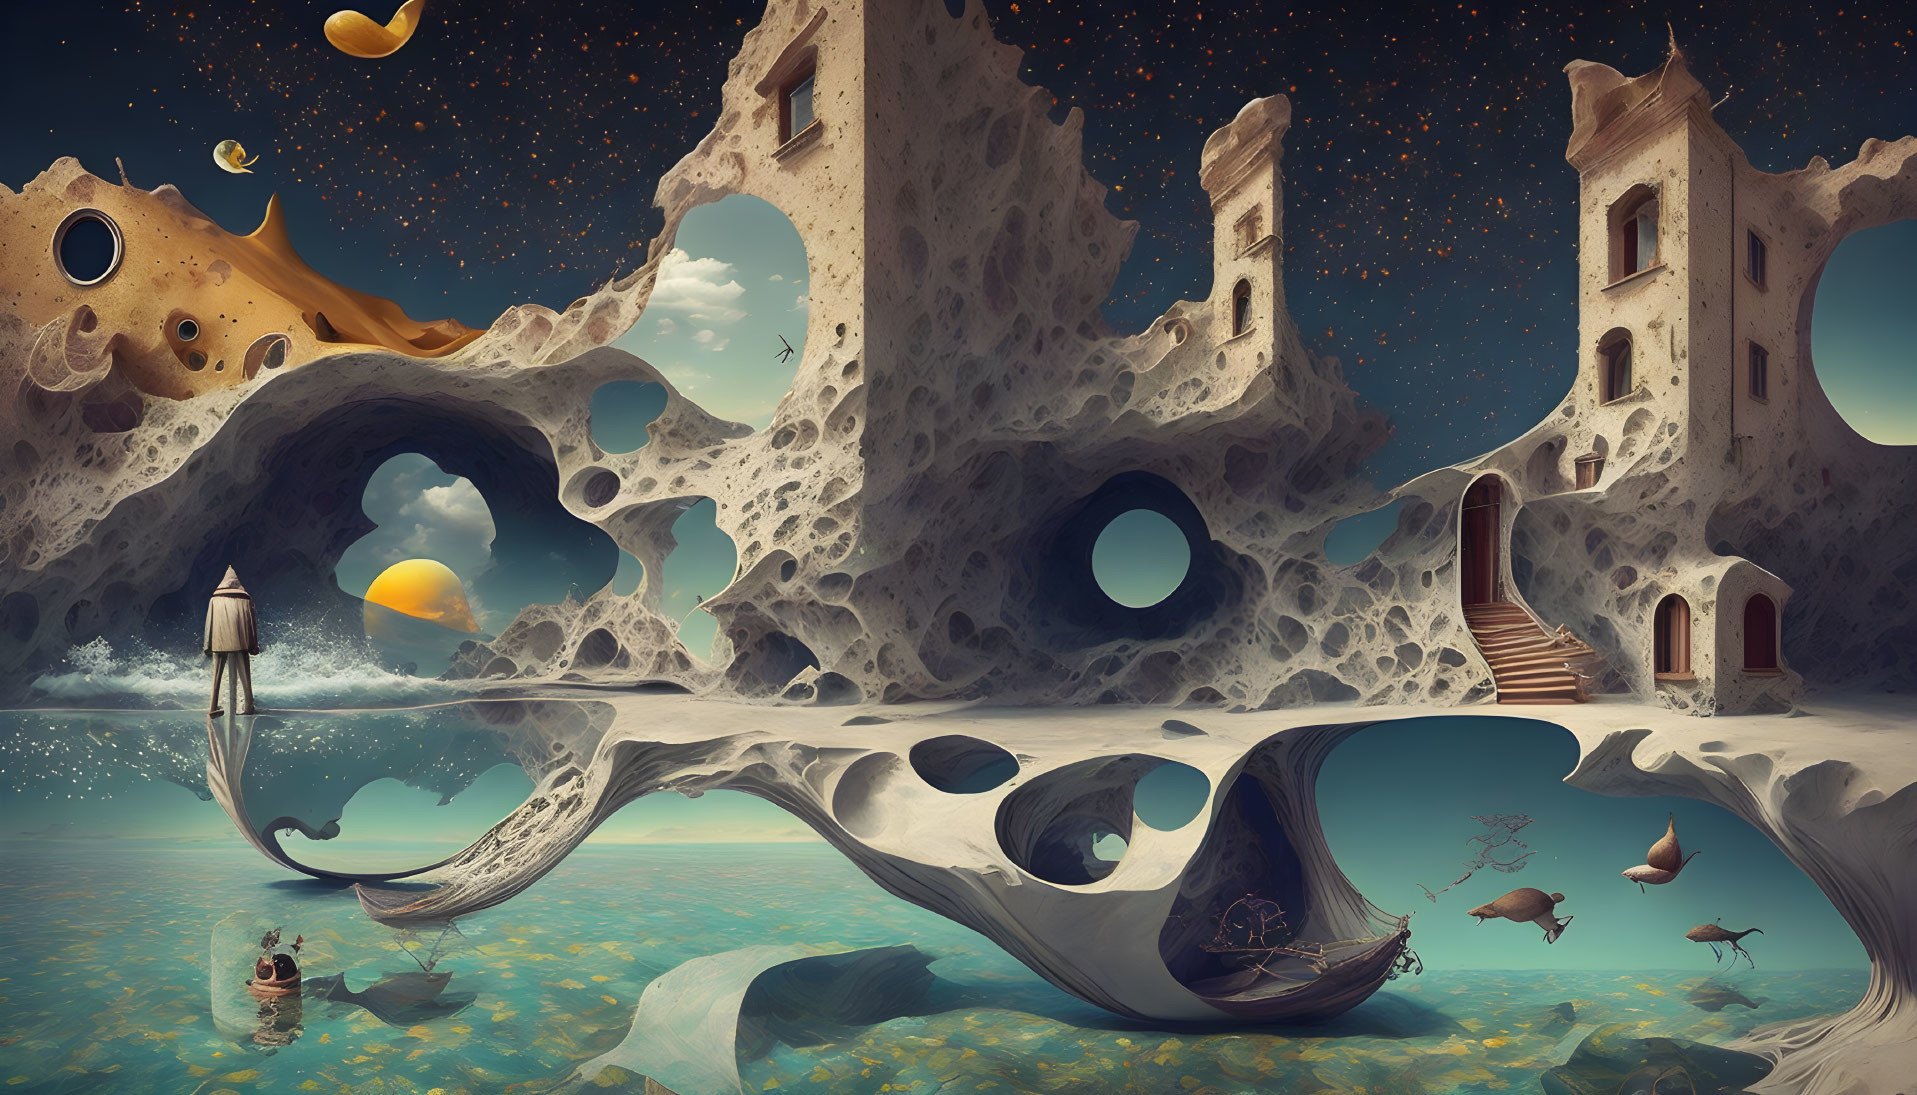 Surreal landscape with floating islands, archaic structures, man on boat under starry sky